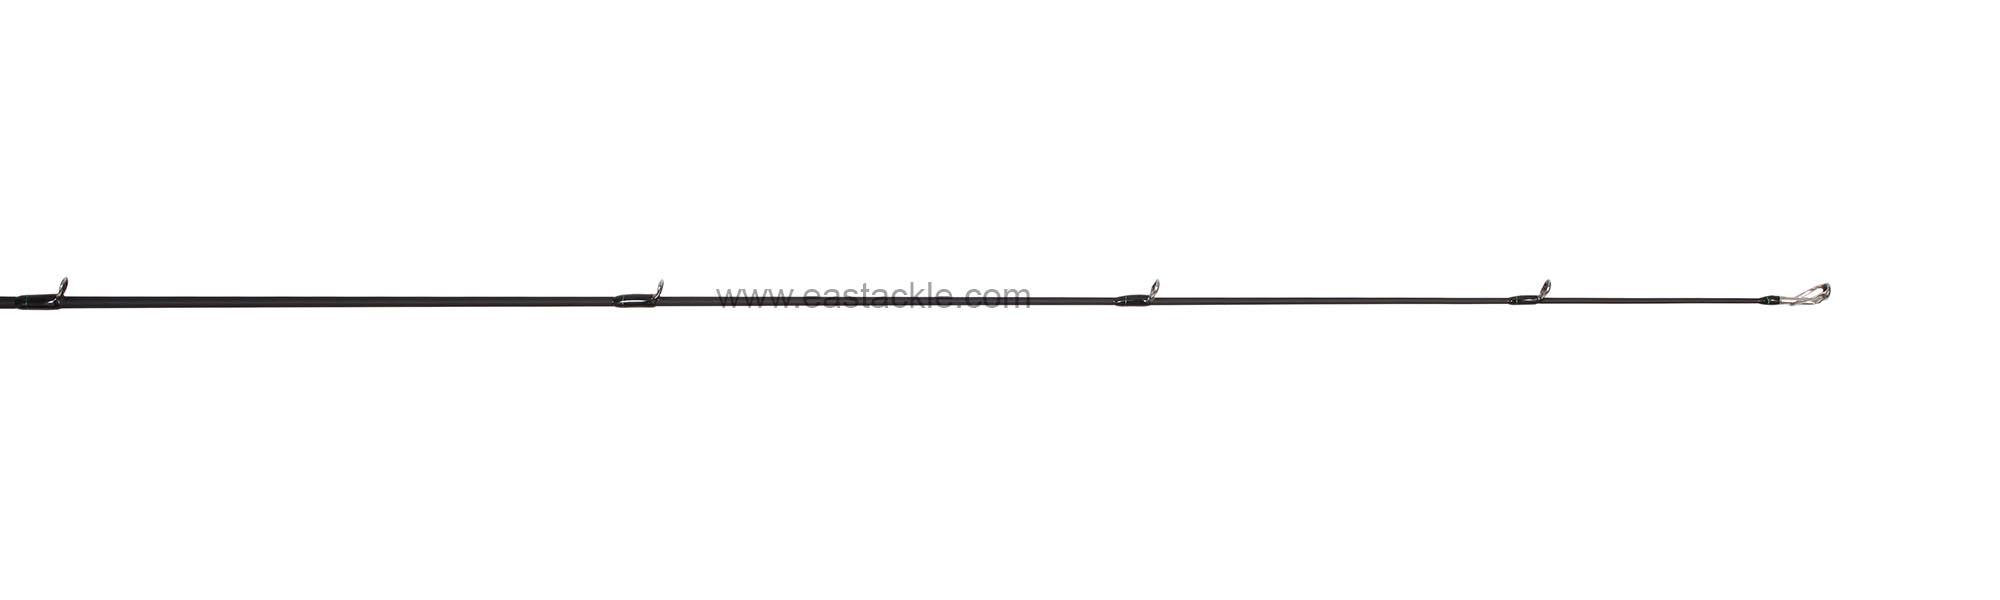 Rapala - Koivu - KVC661MH - Bait Casting Rod - Tip Section (Side View) | Eastackle